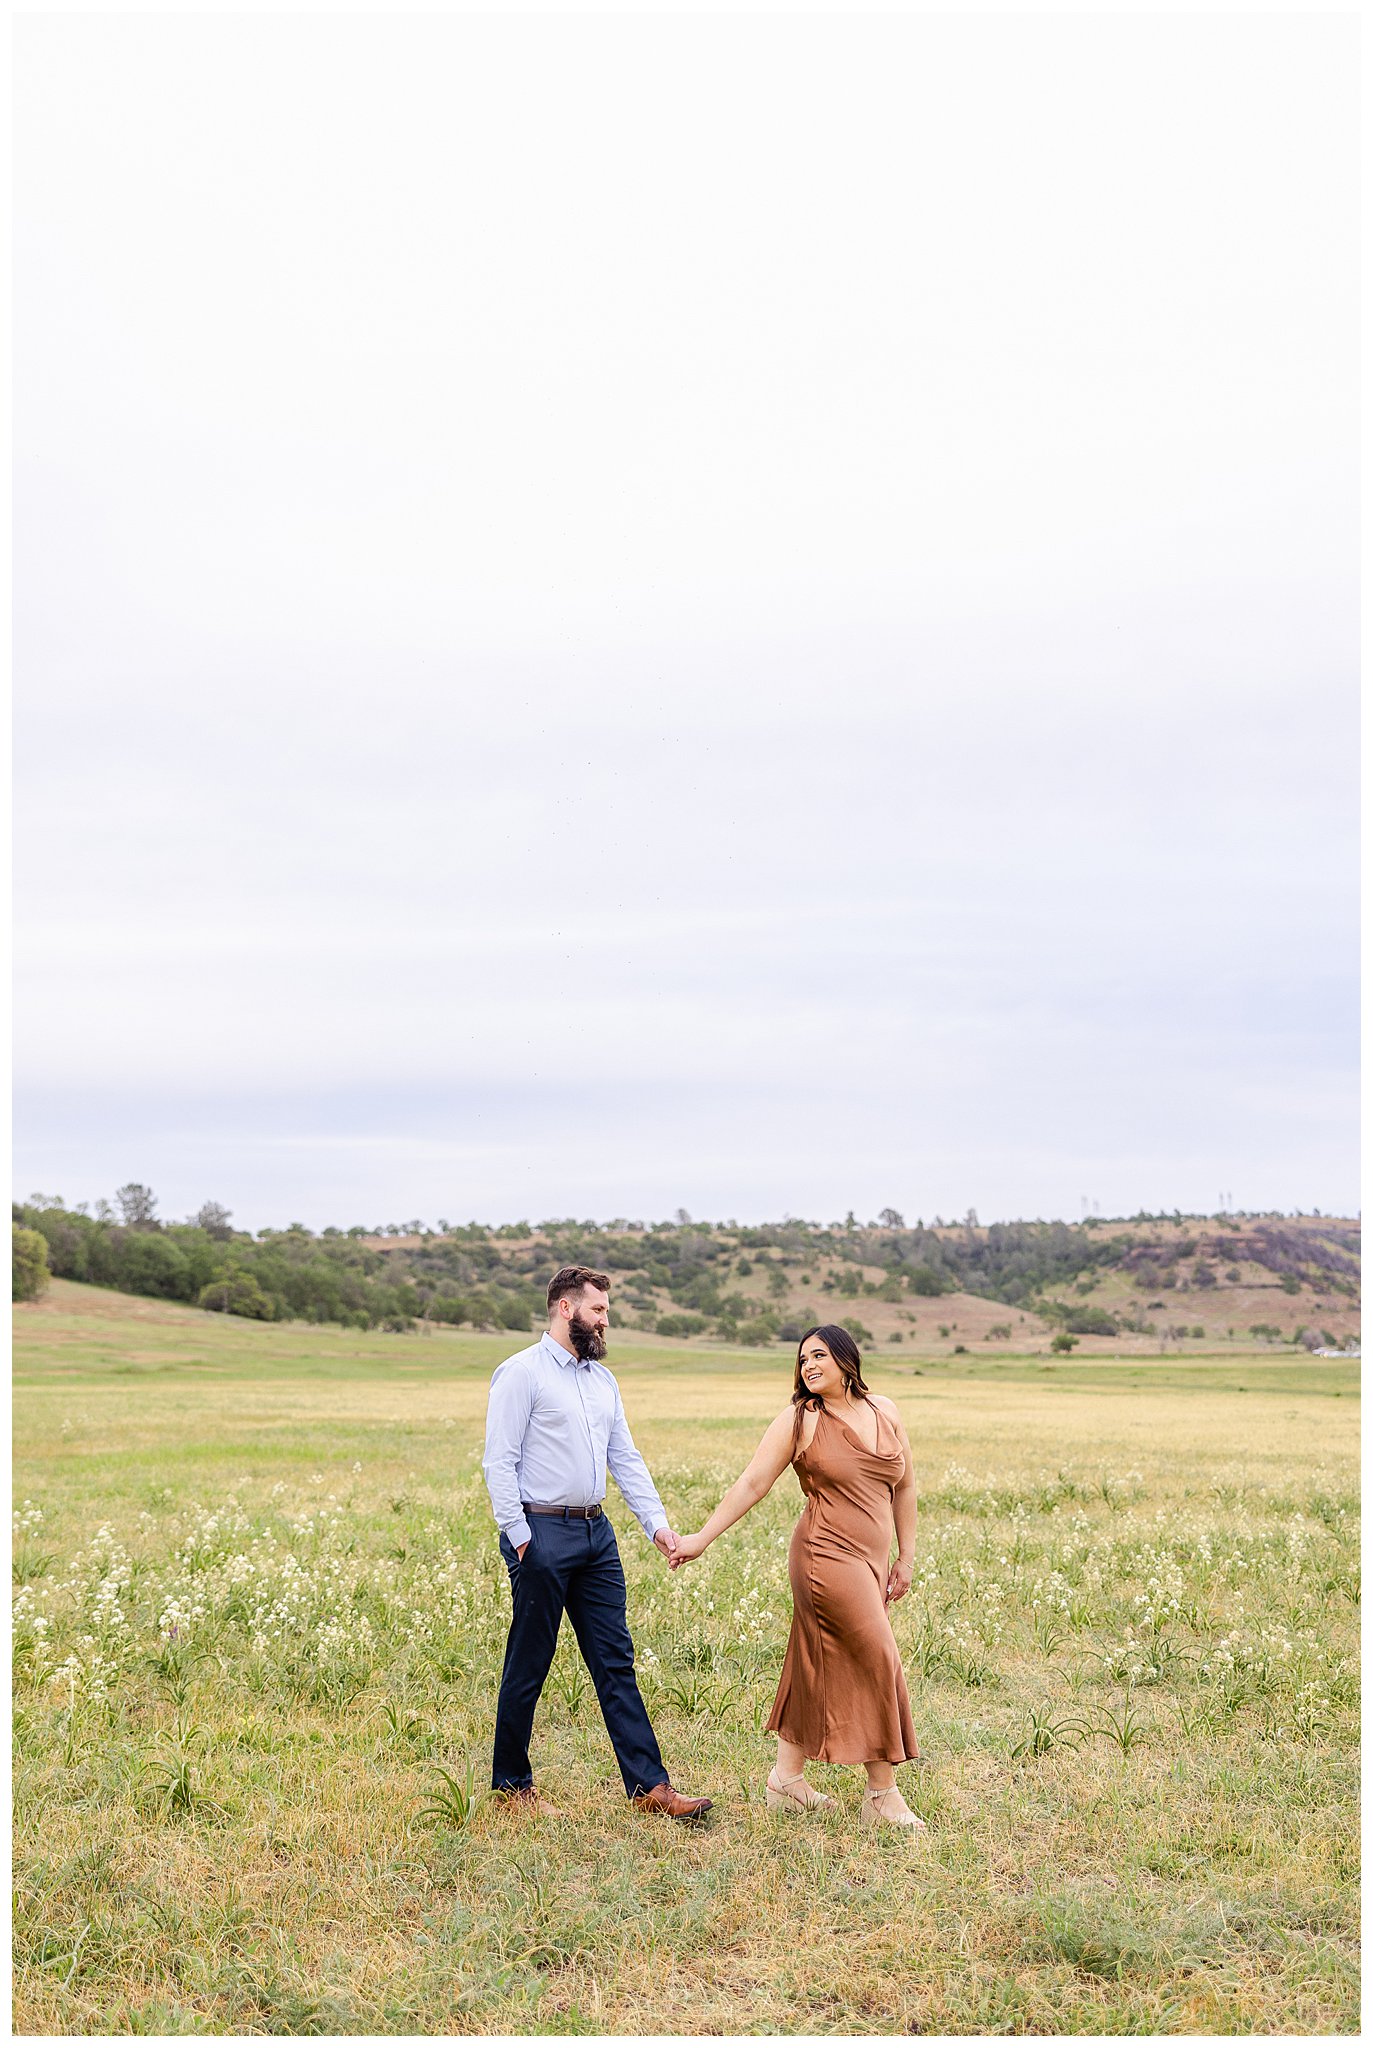 Walking in Upper Bidwell Park for Engagement Session | Kirsty + Ethan